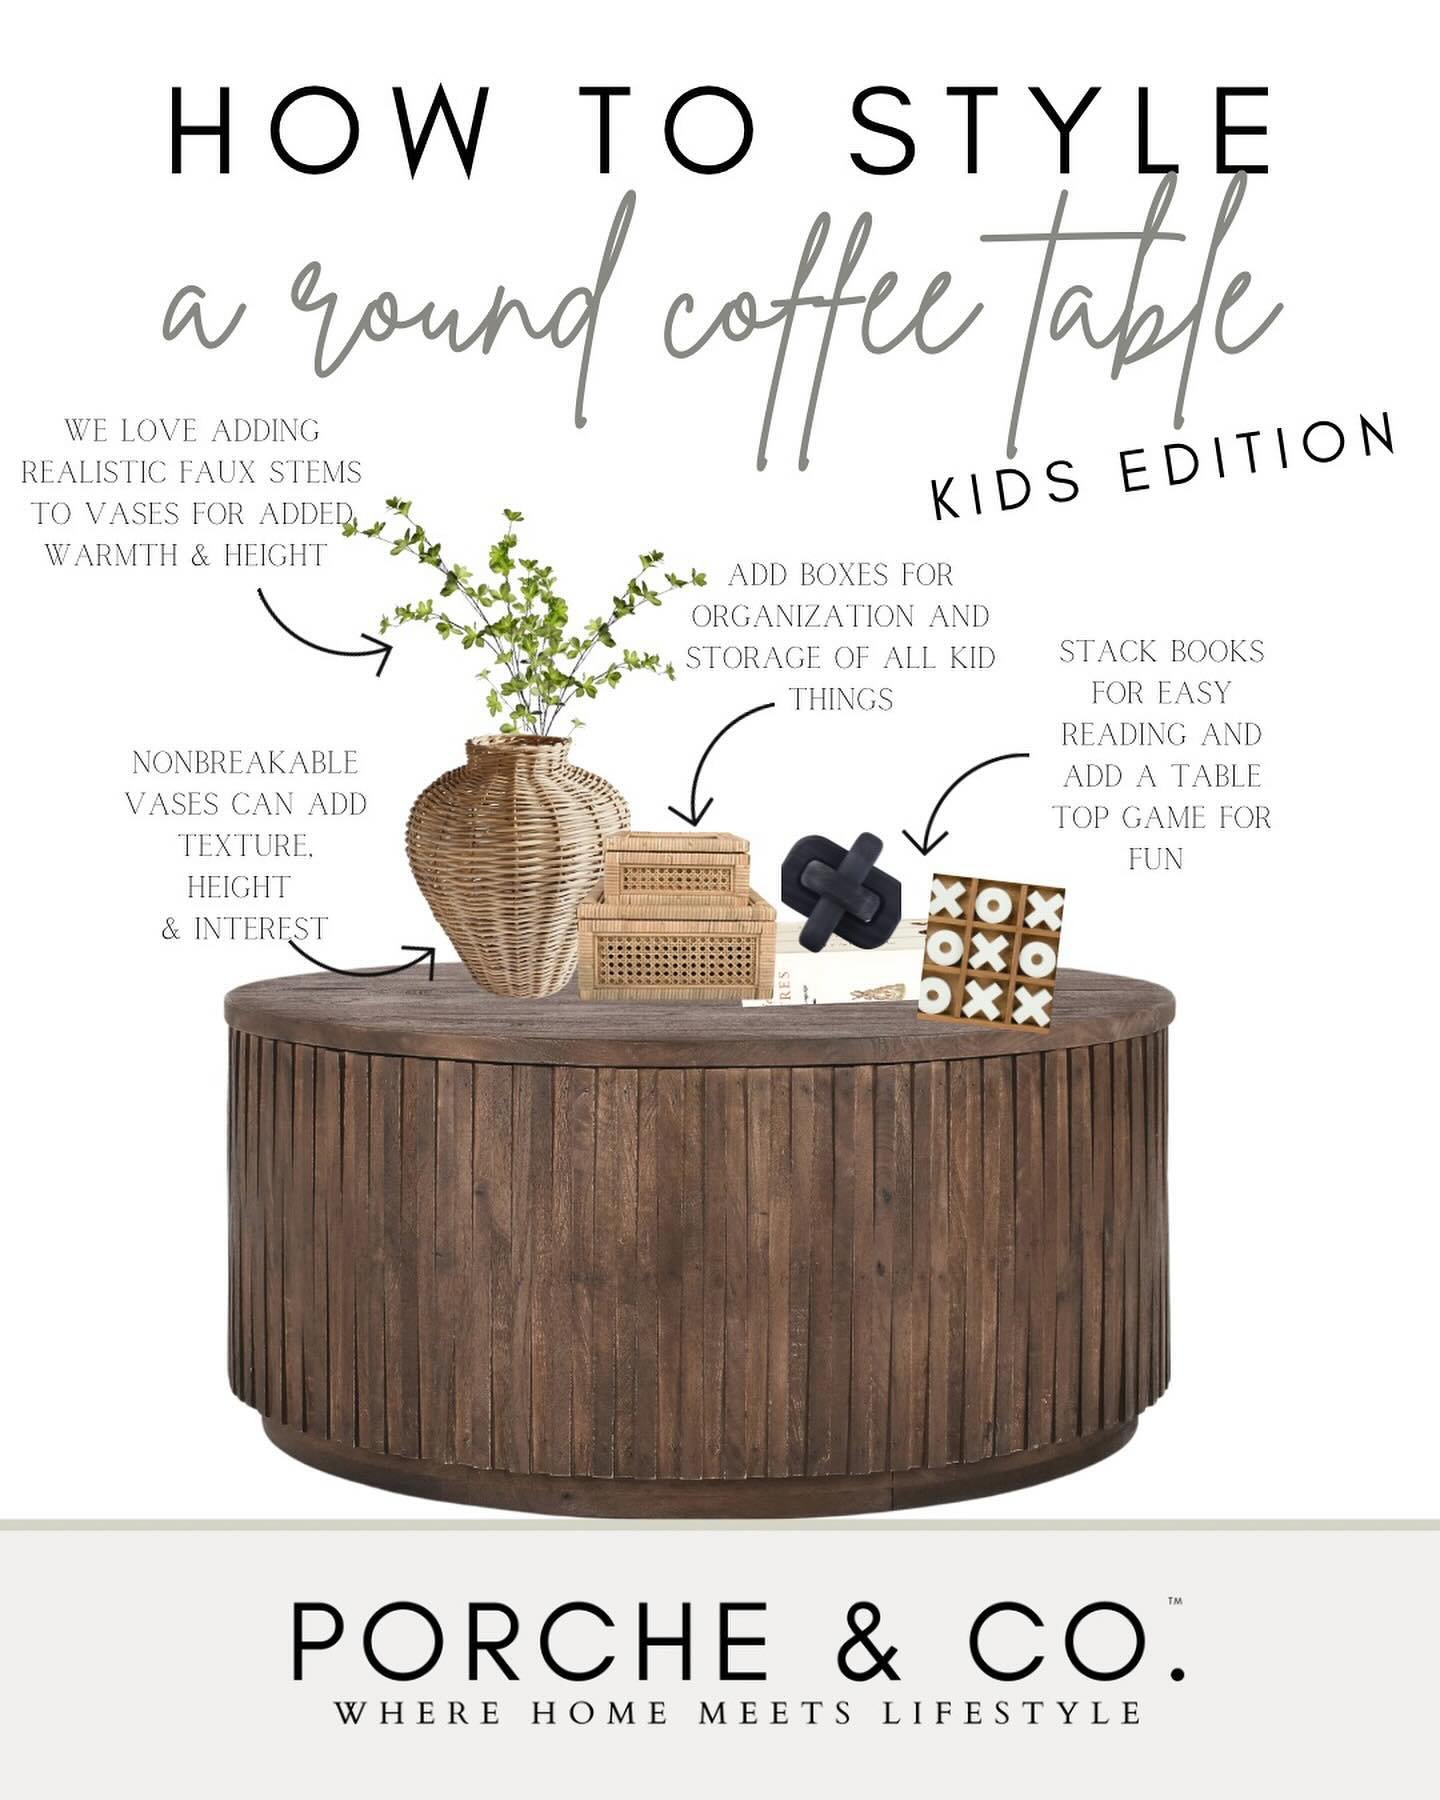 Beauty + Functionality&hellip;kids edition coffee table styling 👏🏼

Using objects with a purpose will forever be our favorite way to style a coffee table bringing together beauty and functionality especially when it is functional for kids. ✨
- - - 